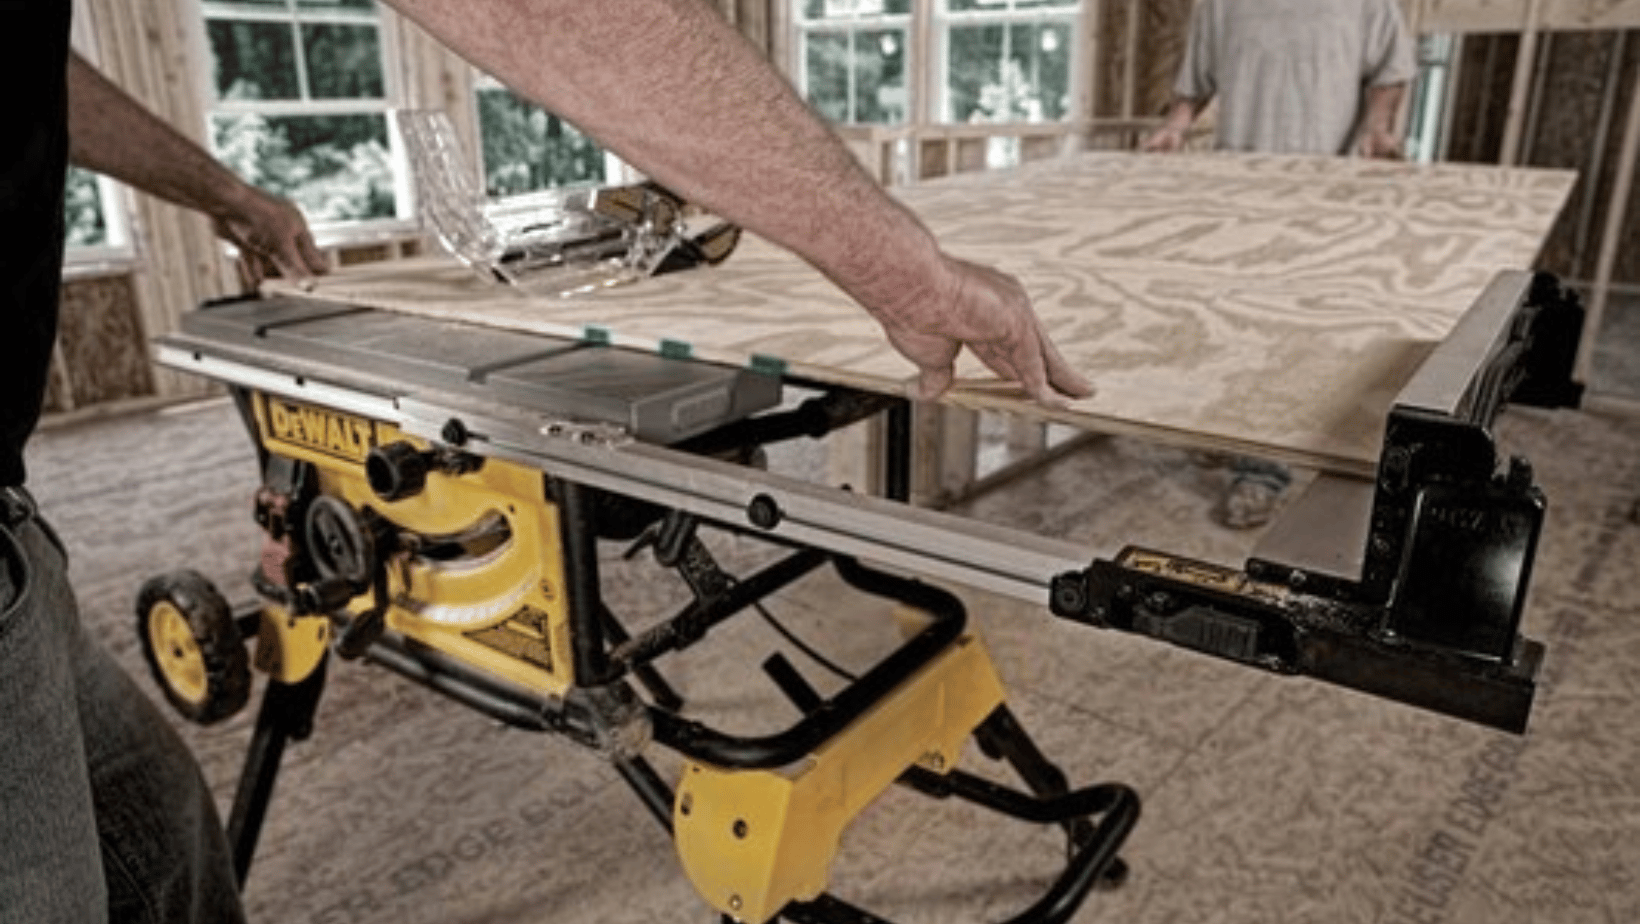 How To Mount a Portable Table Saw?